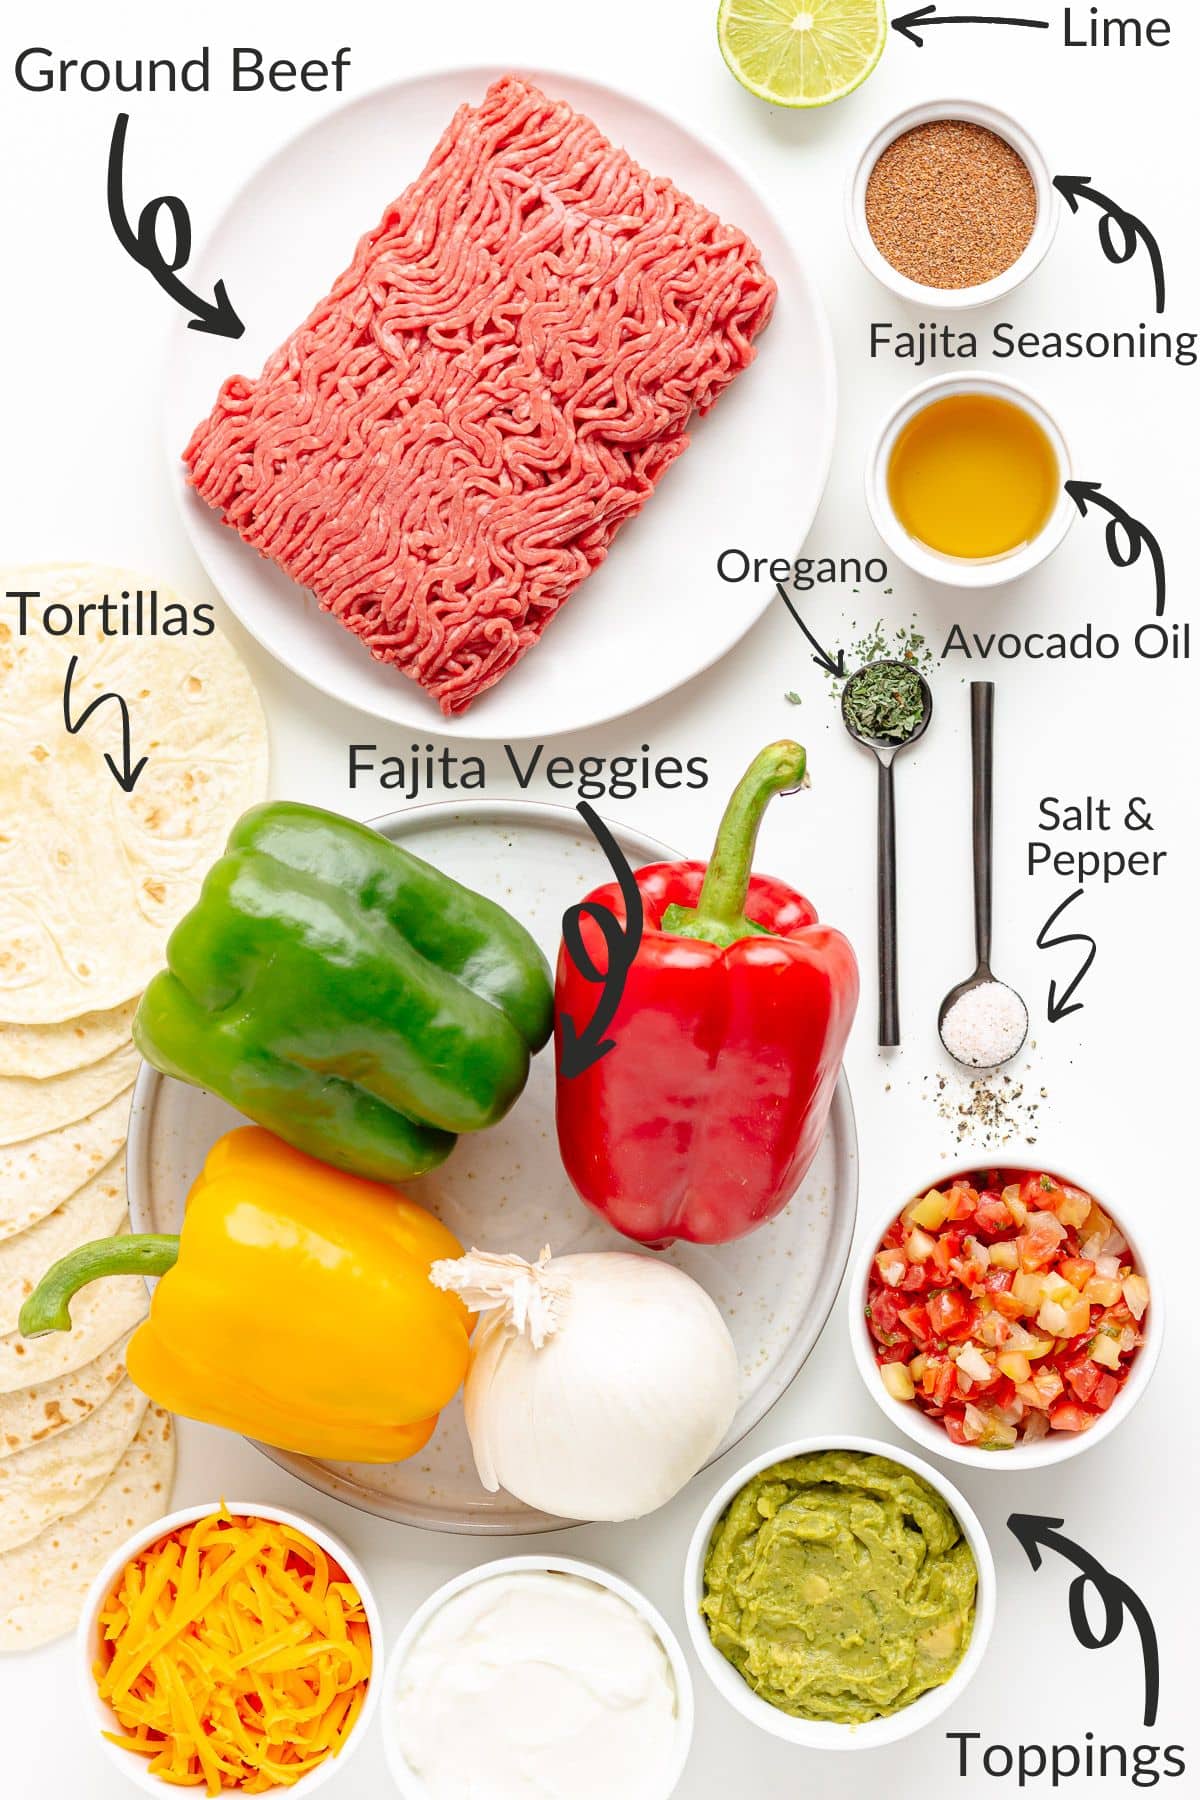 Labelled image of ingredients needed to make ground beef fajitas.